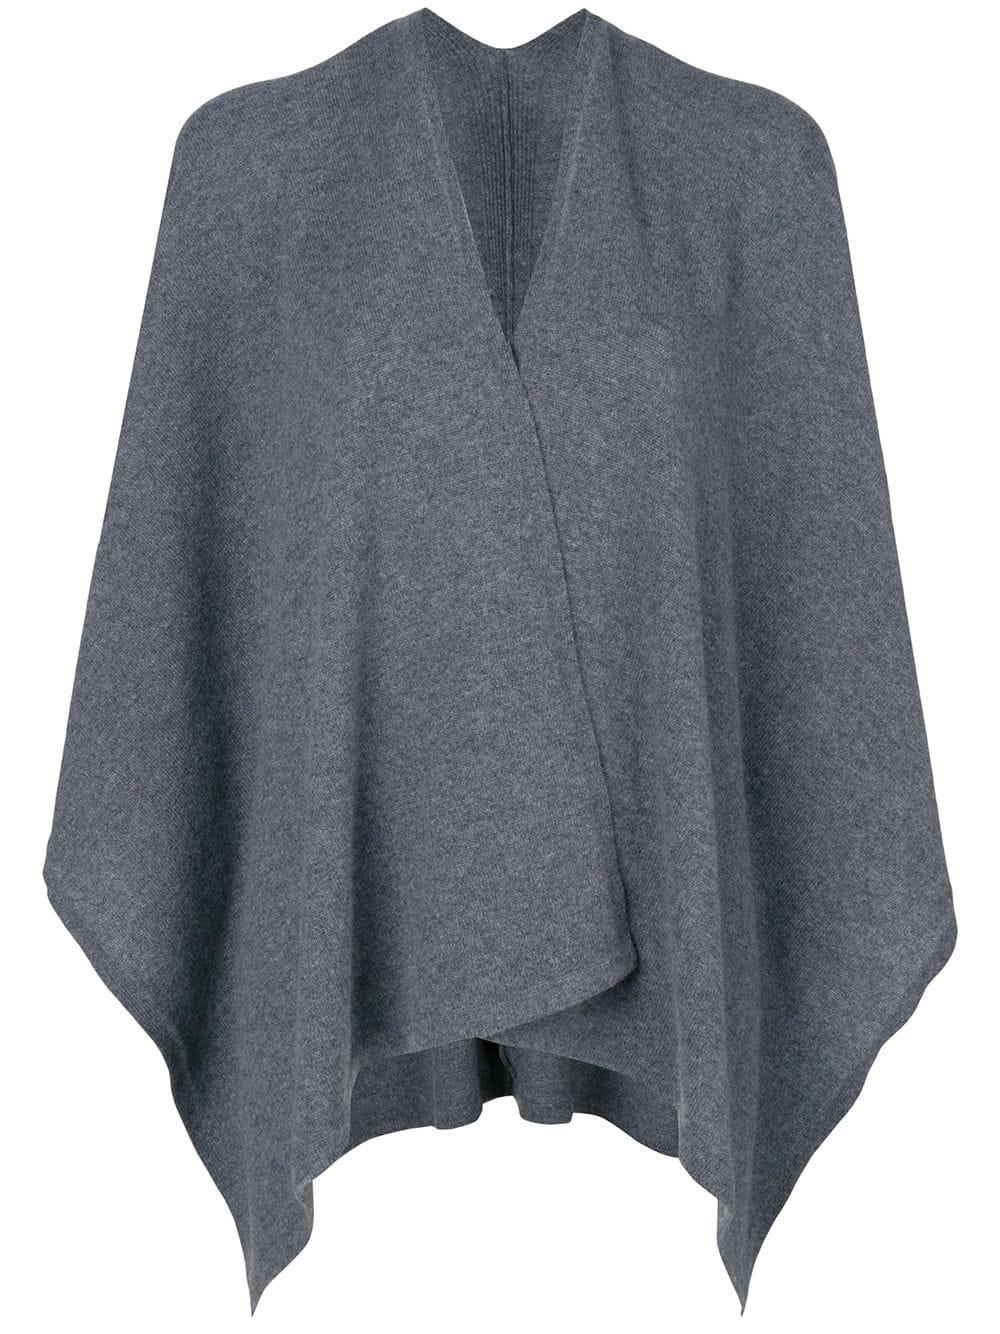 Pringle of Scotland Cashmere Large Scarf in Grey (Gray) - Lyst